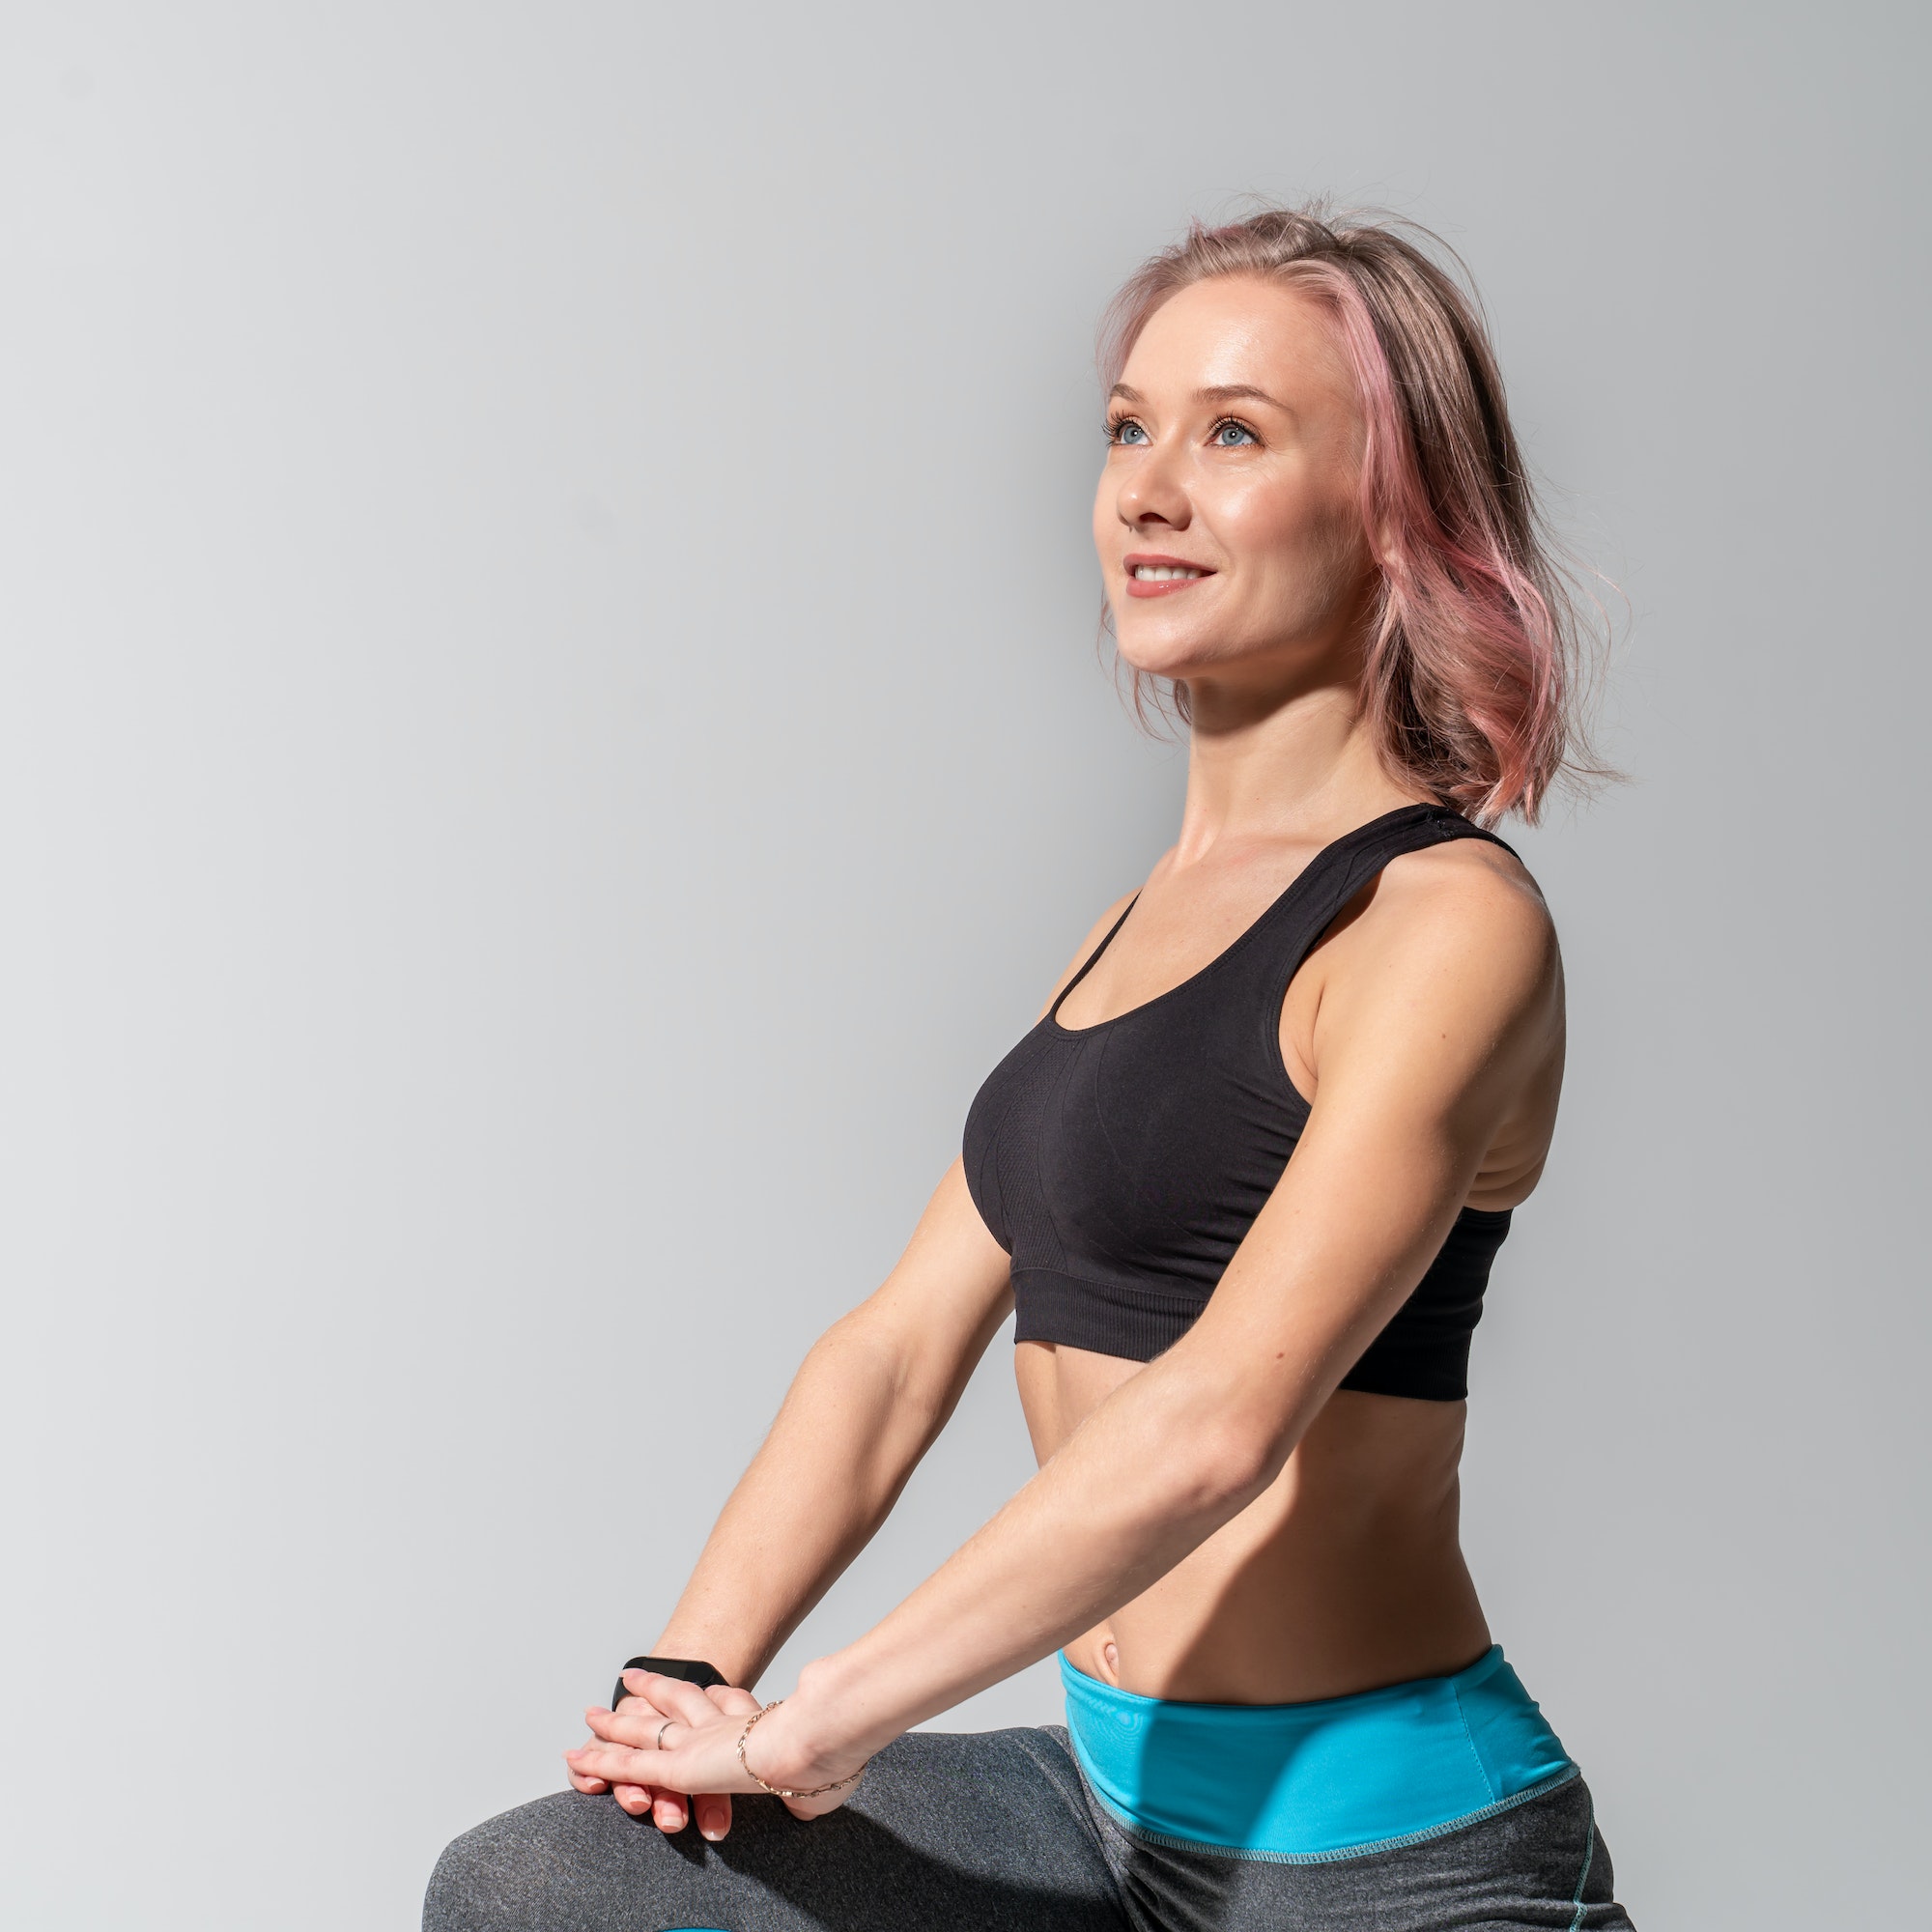 Caucasian girl doing sports exercises for stretching muscles on a gray studio background